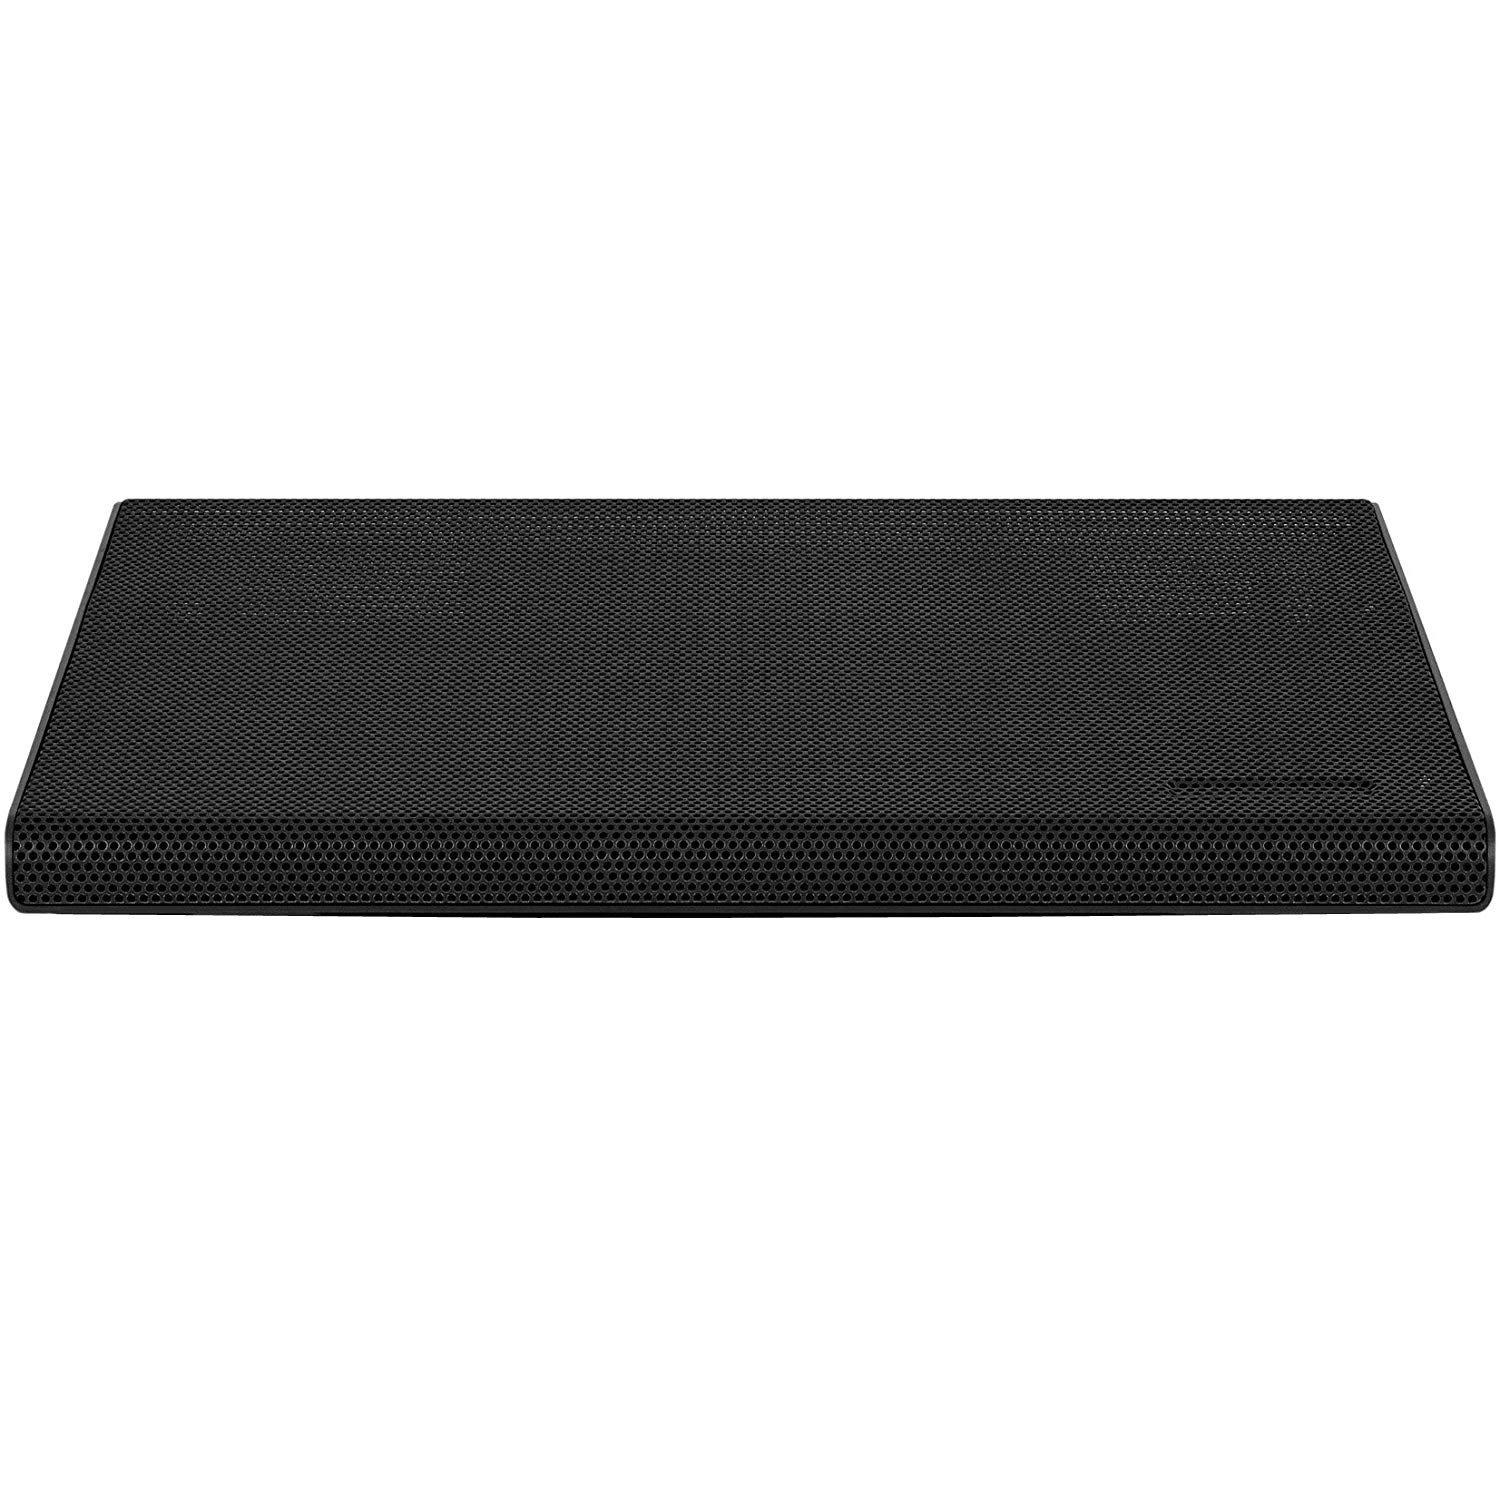 list item 3 of 3 Aluratek Slim USB Laptop Cooling Pad with Dual Fans